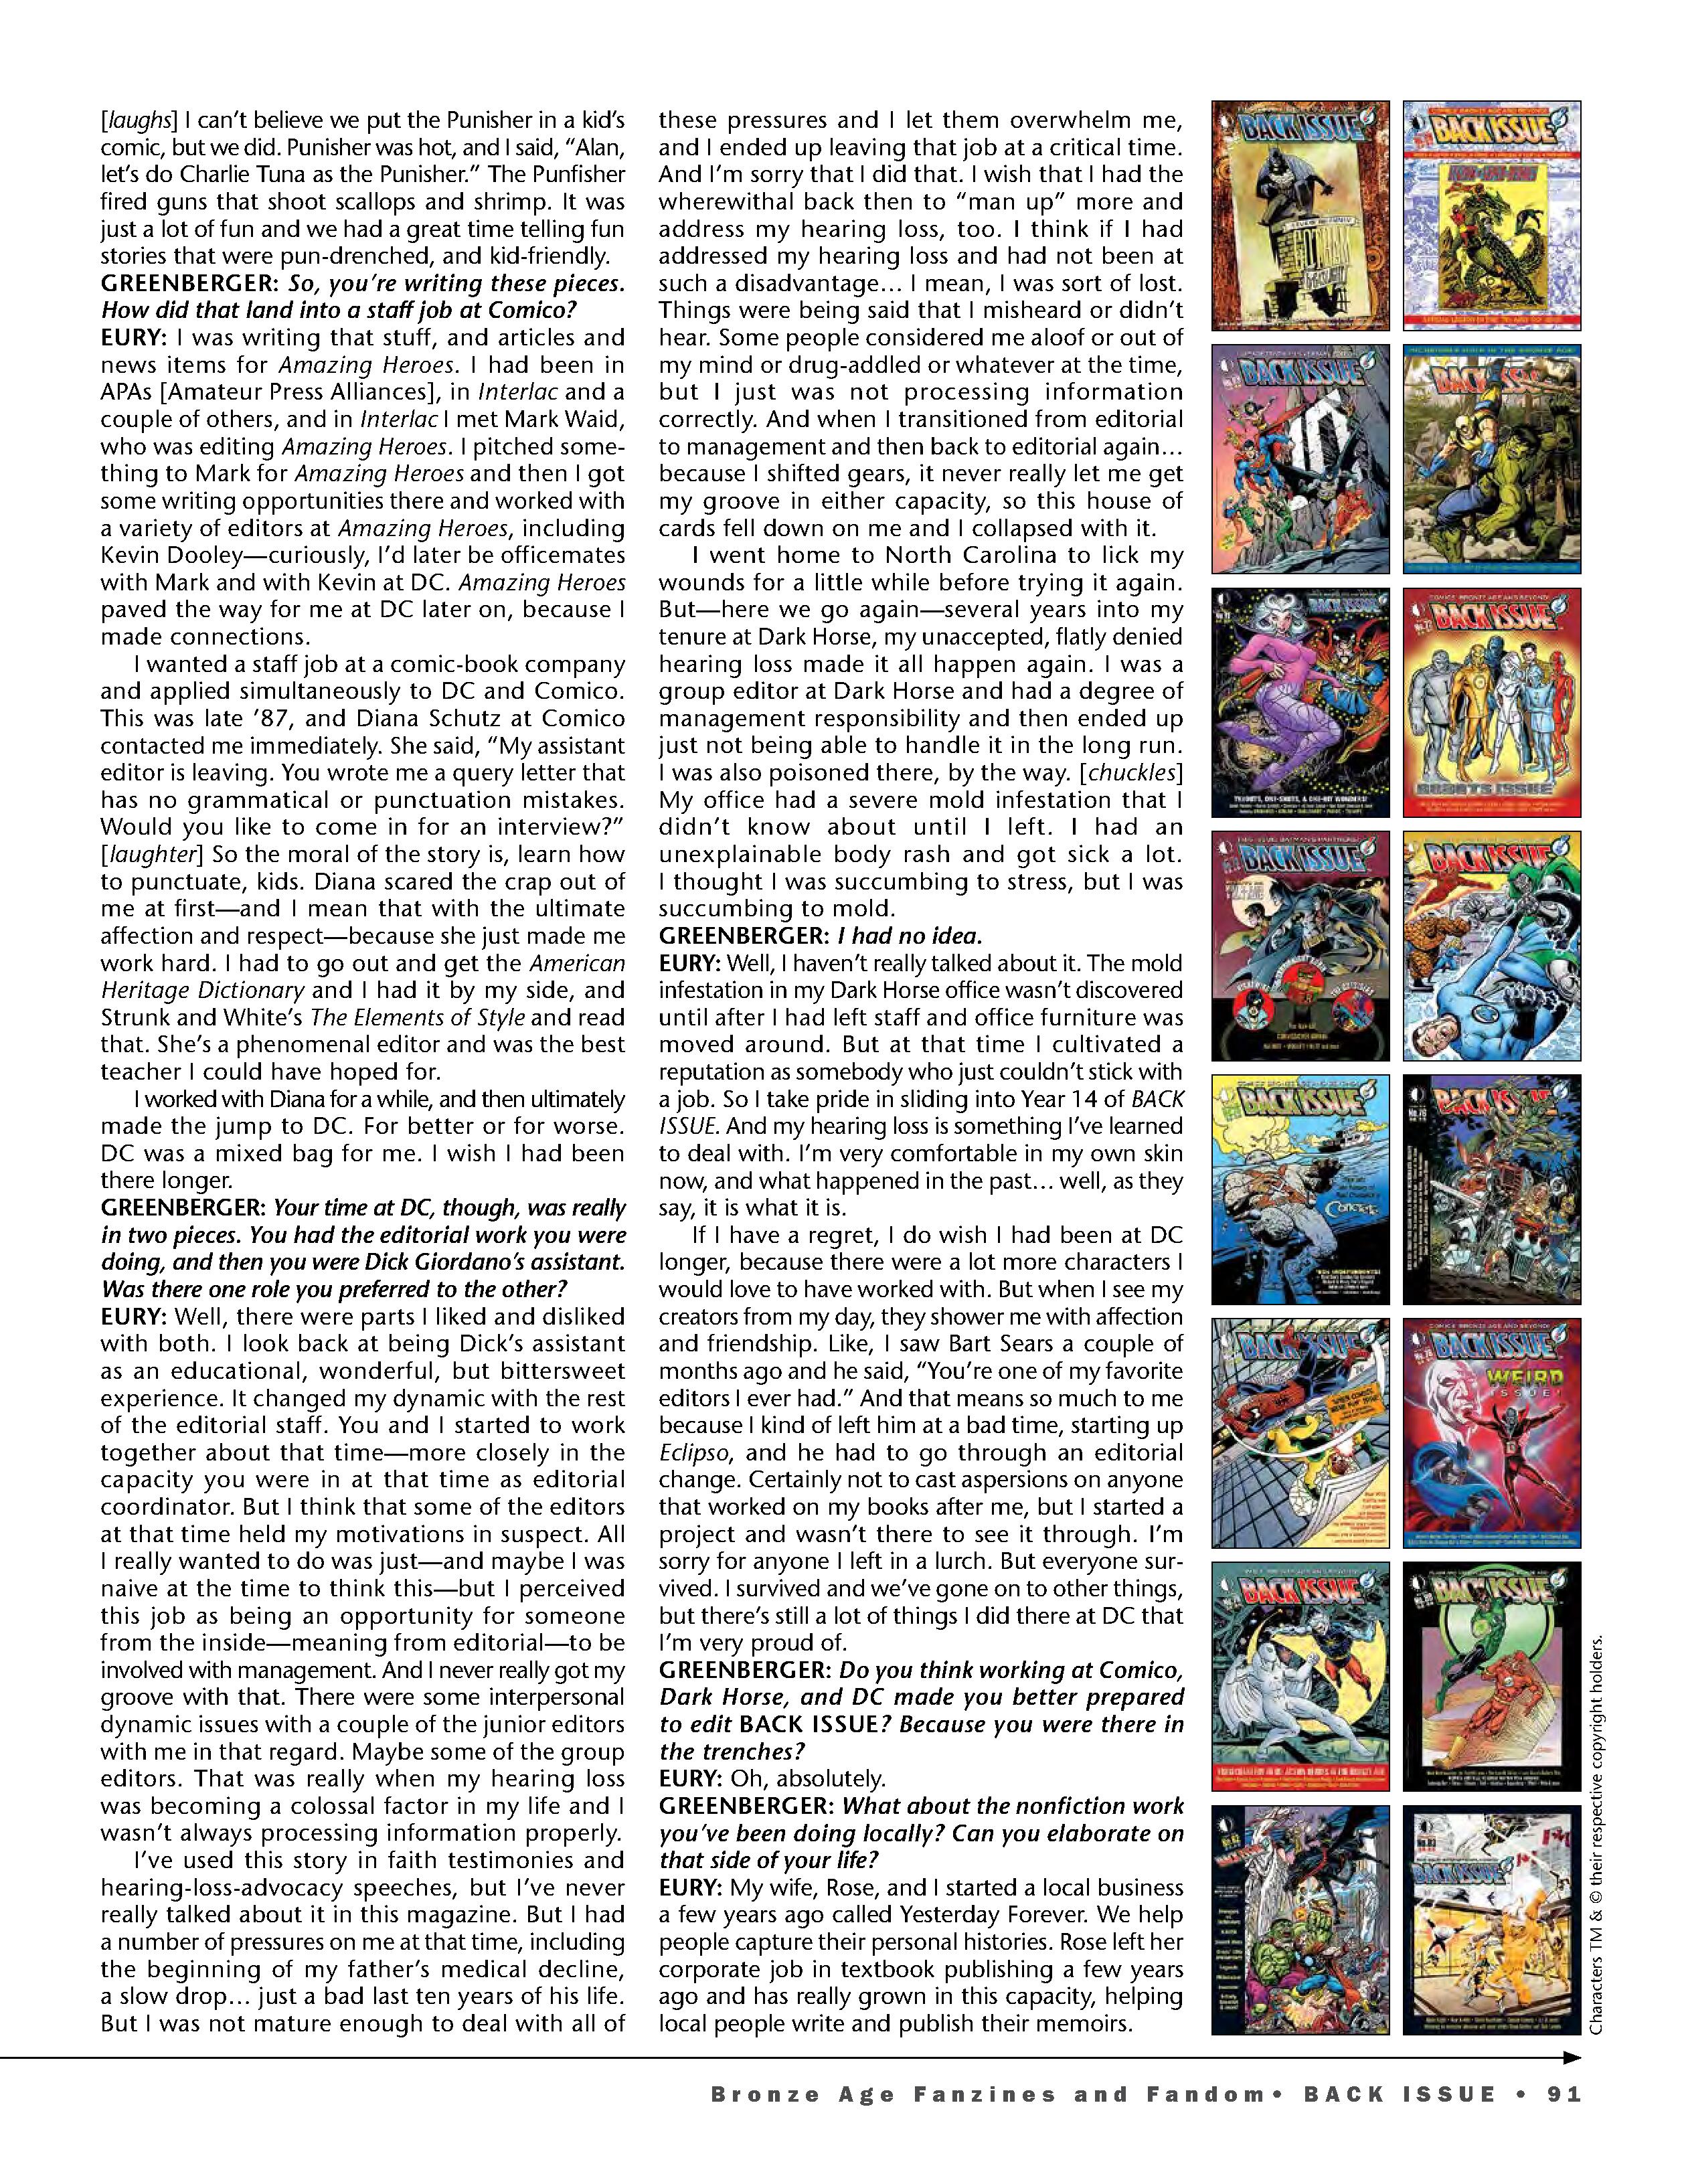 Read online Back Issue comic -  Issue #100 - 93